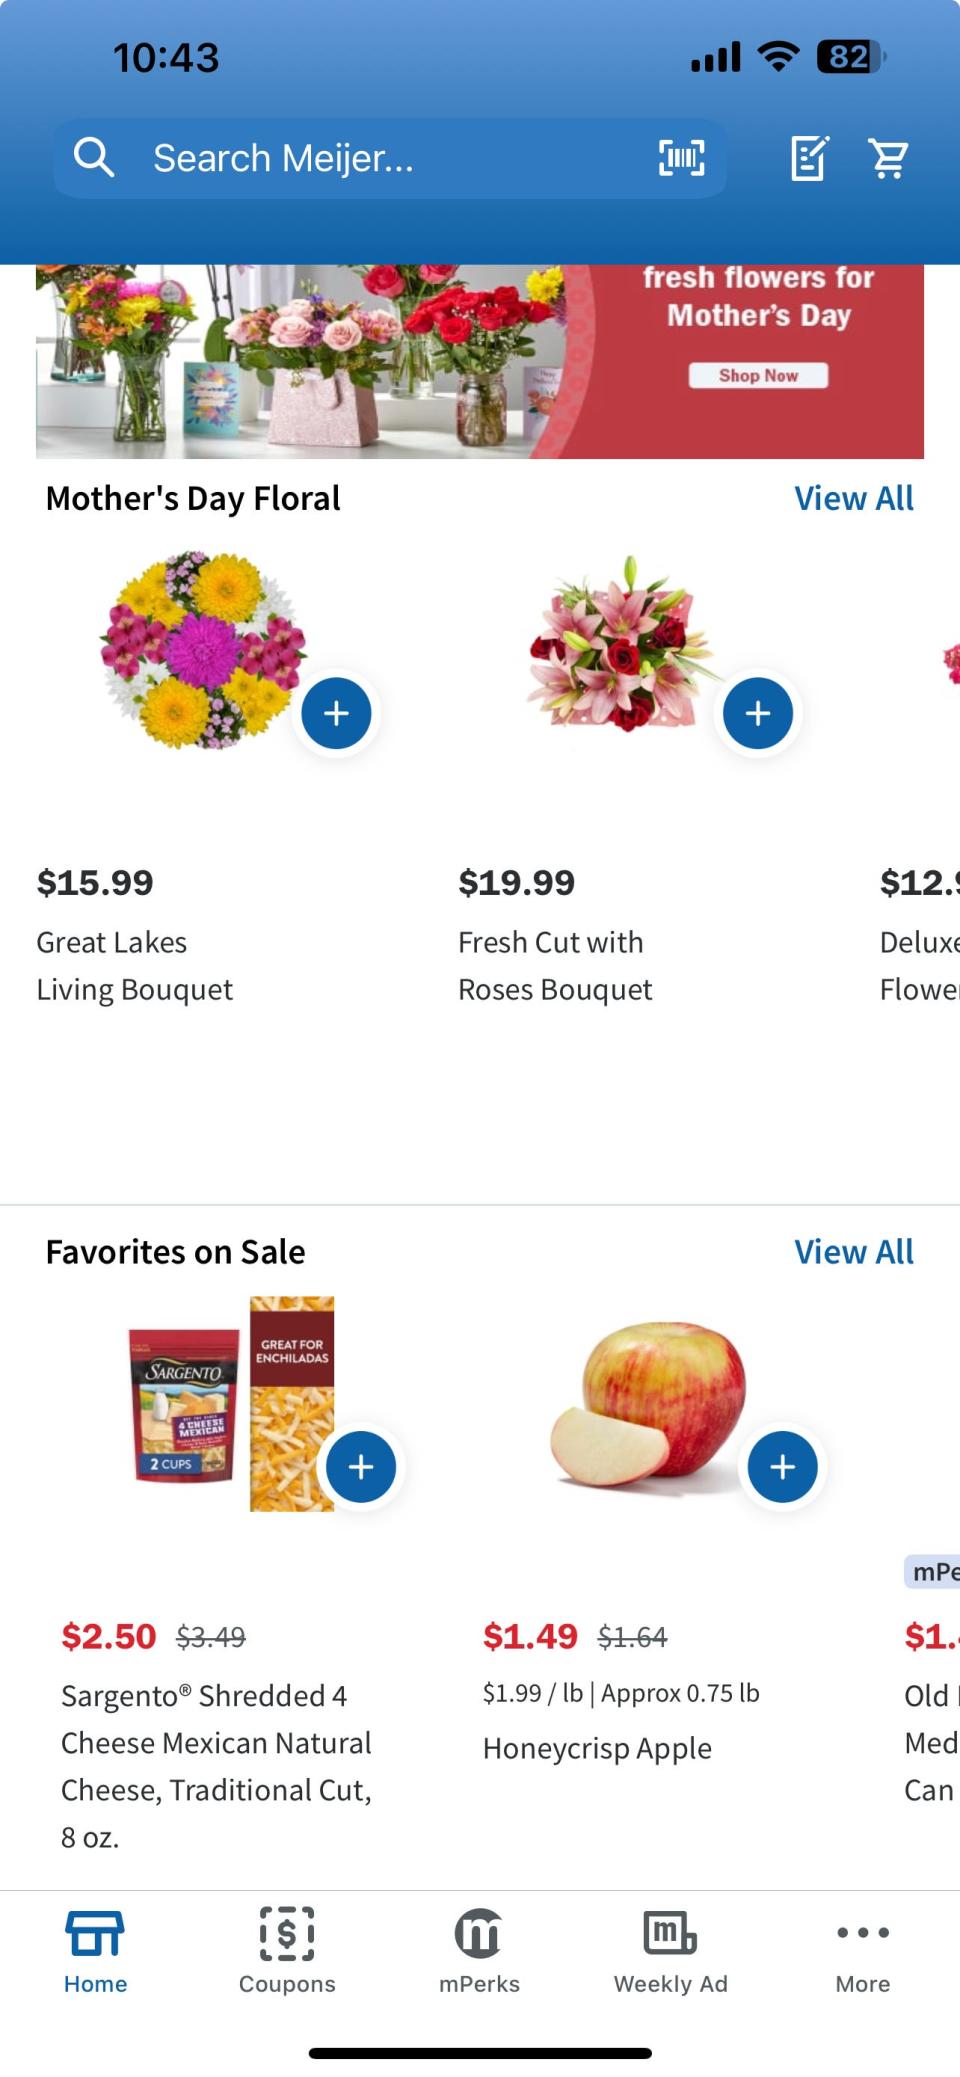 The home screen of the Meijer app displays specials and also points out items shoppers regularly purchase that are on sale at any given time.